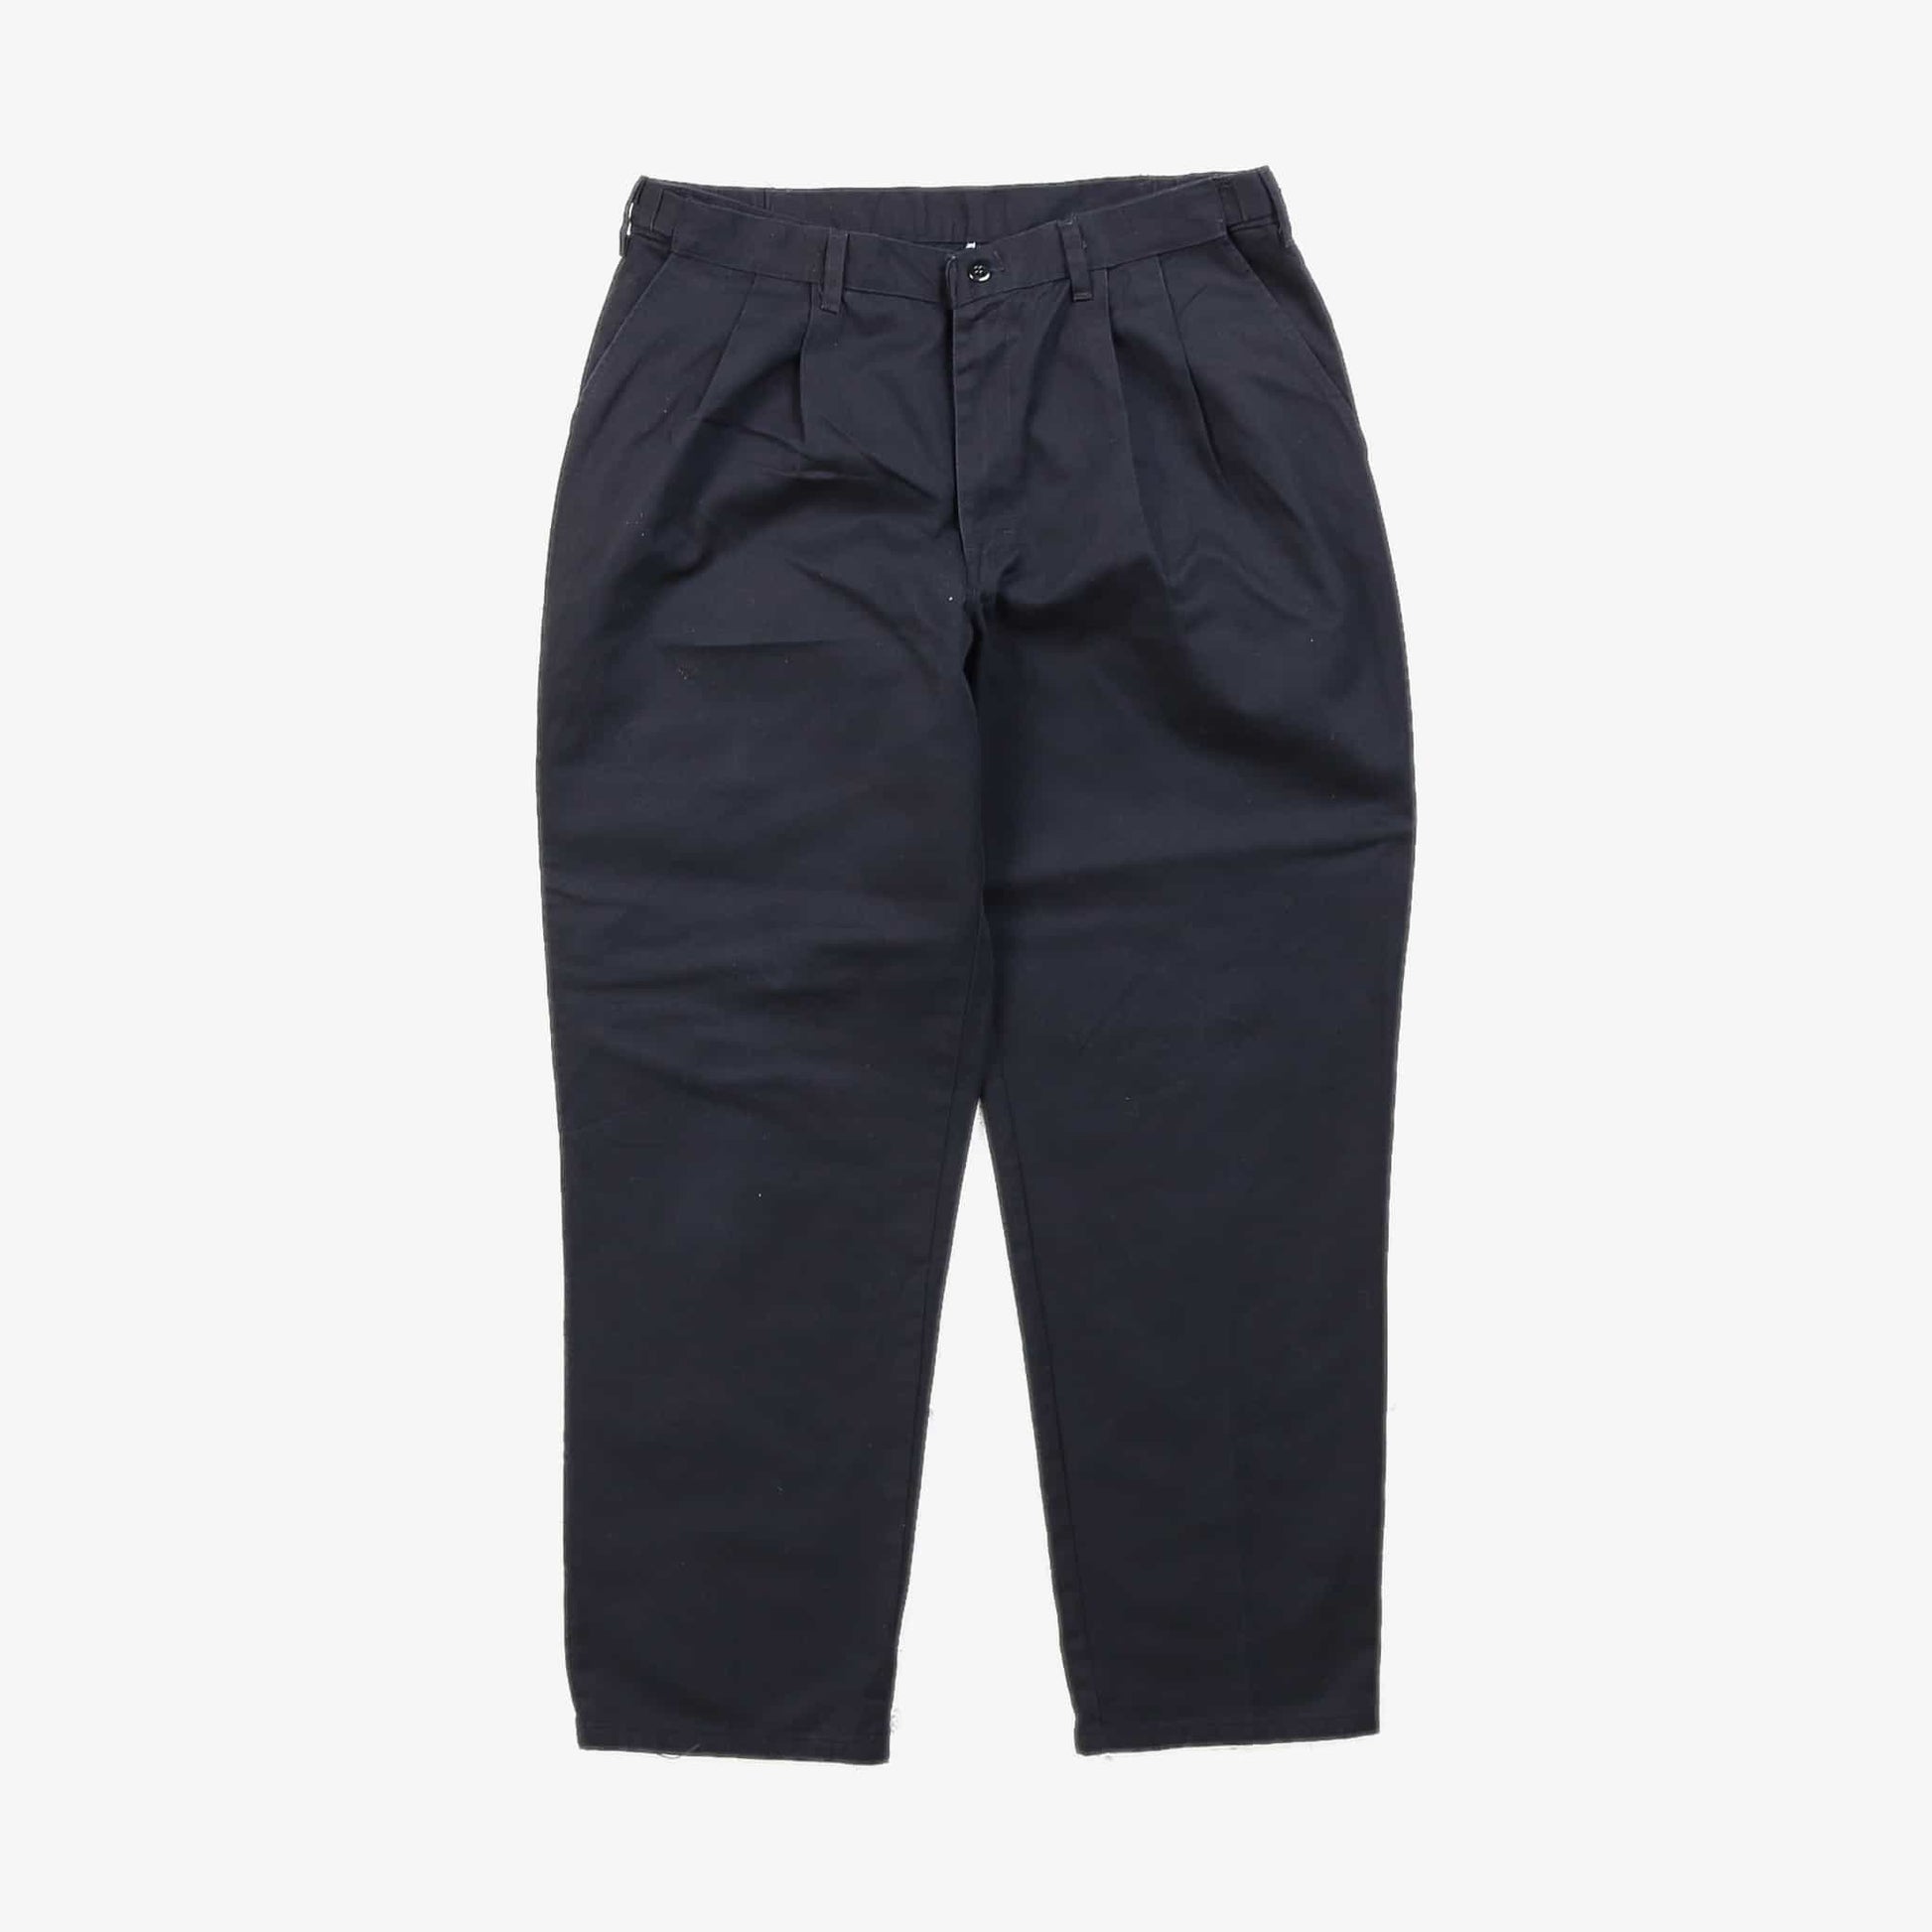 Pleated Work Trousers - Black - 36/30 - American Madness